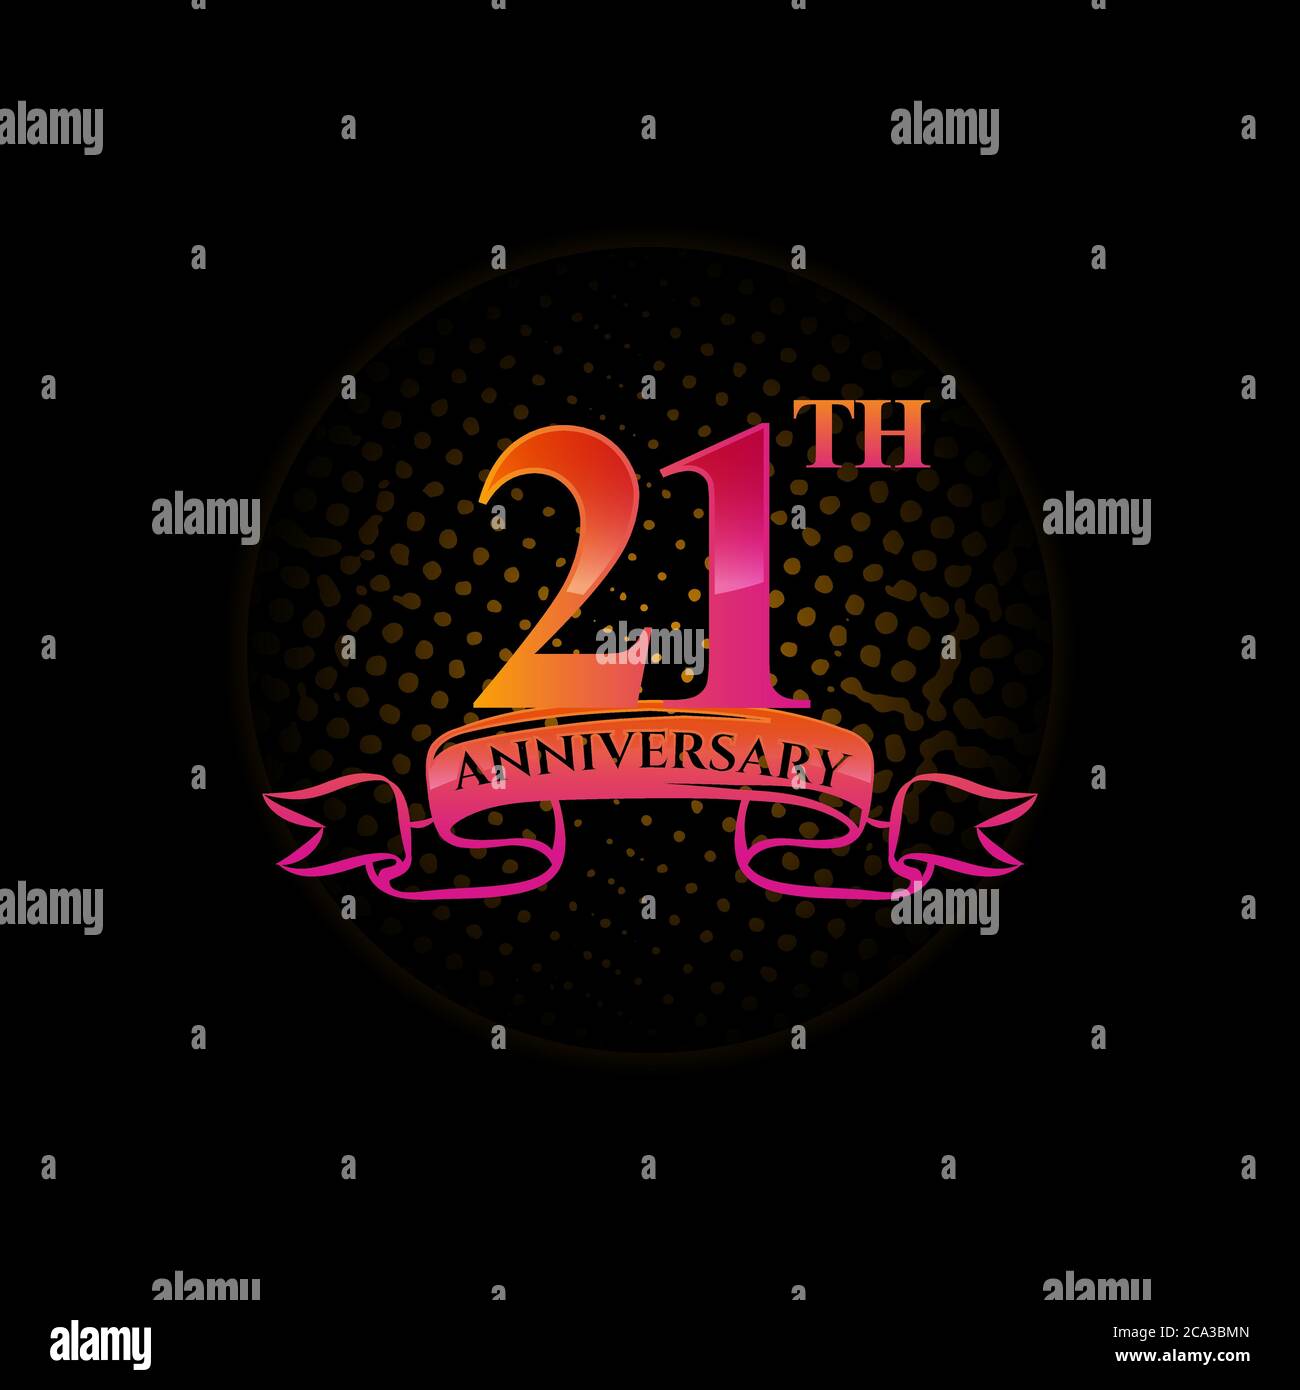 Celebrating the 21th anniversary logo, with gold rings and gradation ribbons isolated on a black background. Stock Vector